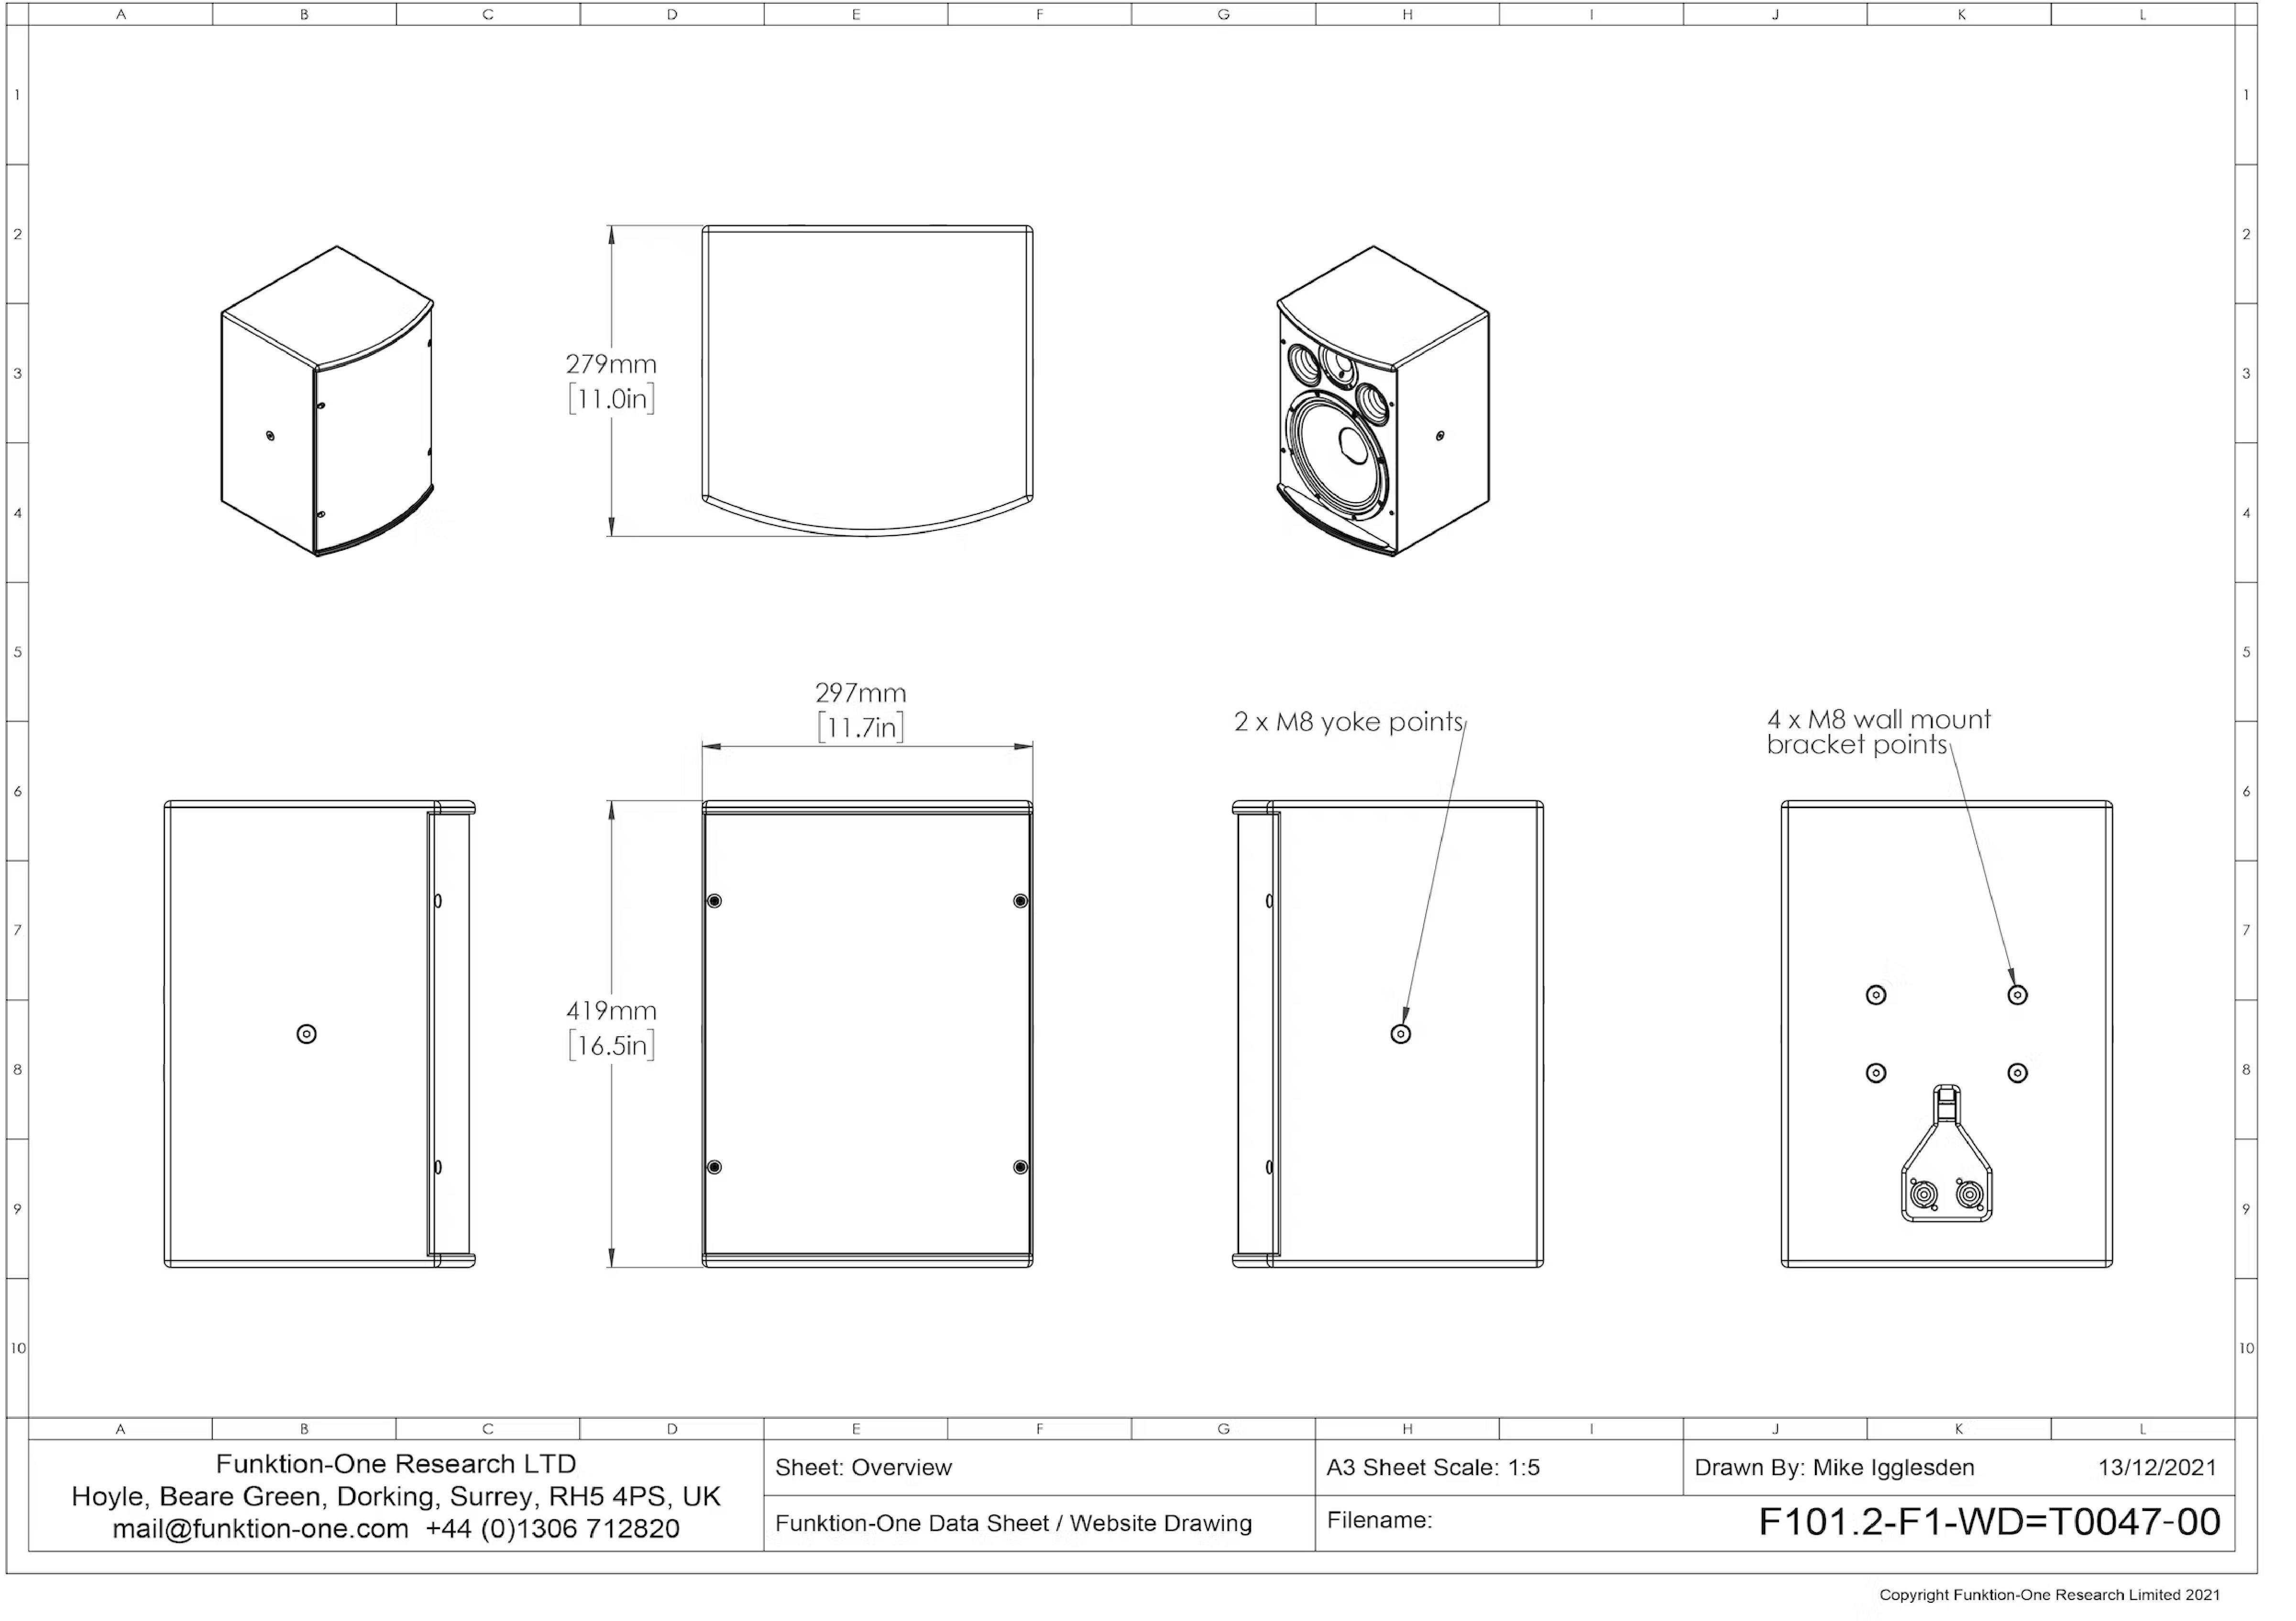 F101.2 technical drawing